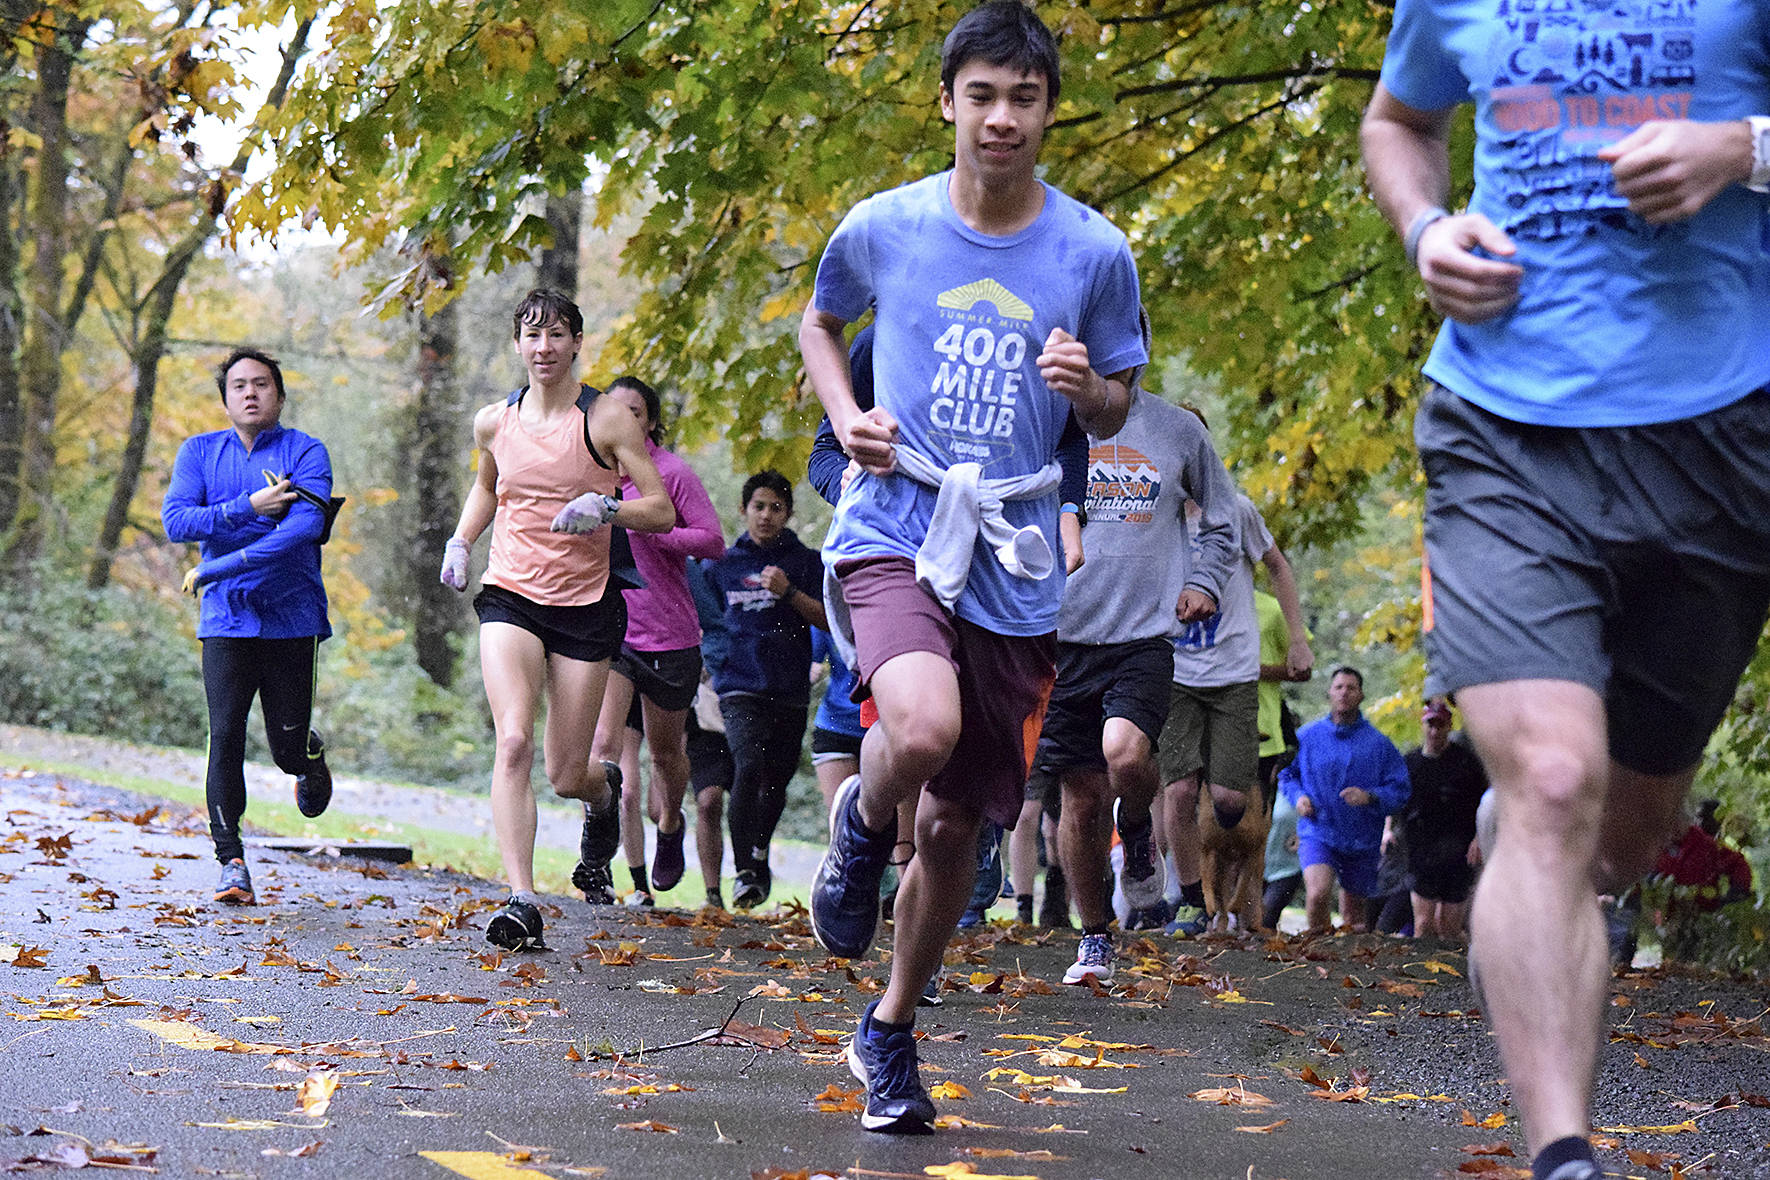 The 100th parkrun on Oct. 19 was just a prelude to the parkrun birthday festivities planned for Nov. 16. (Photo courtesy of Renton parkrun)